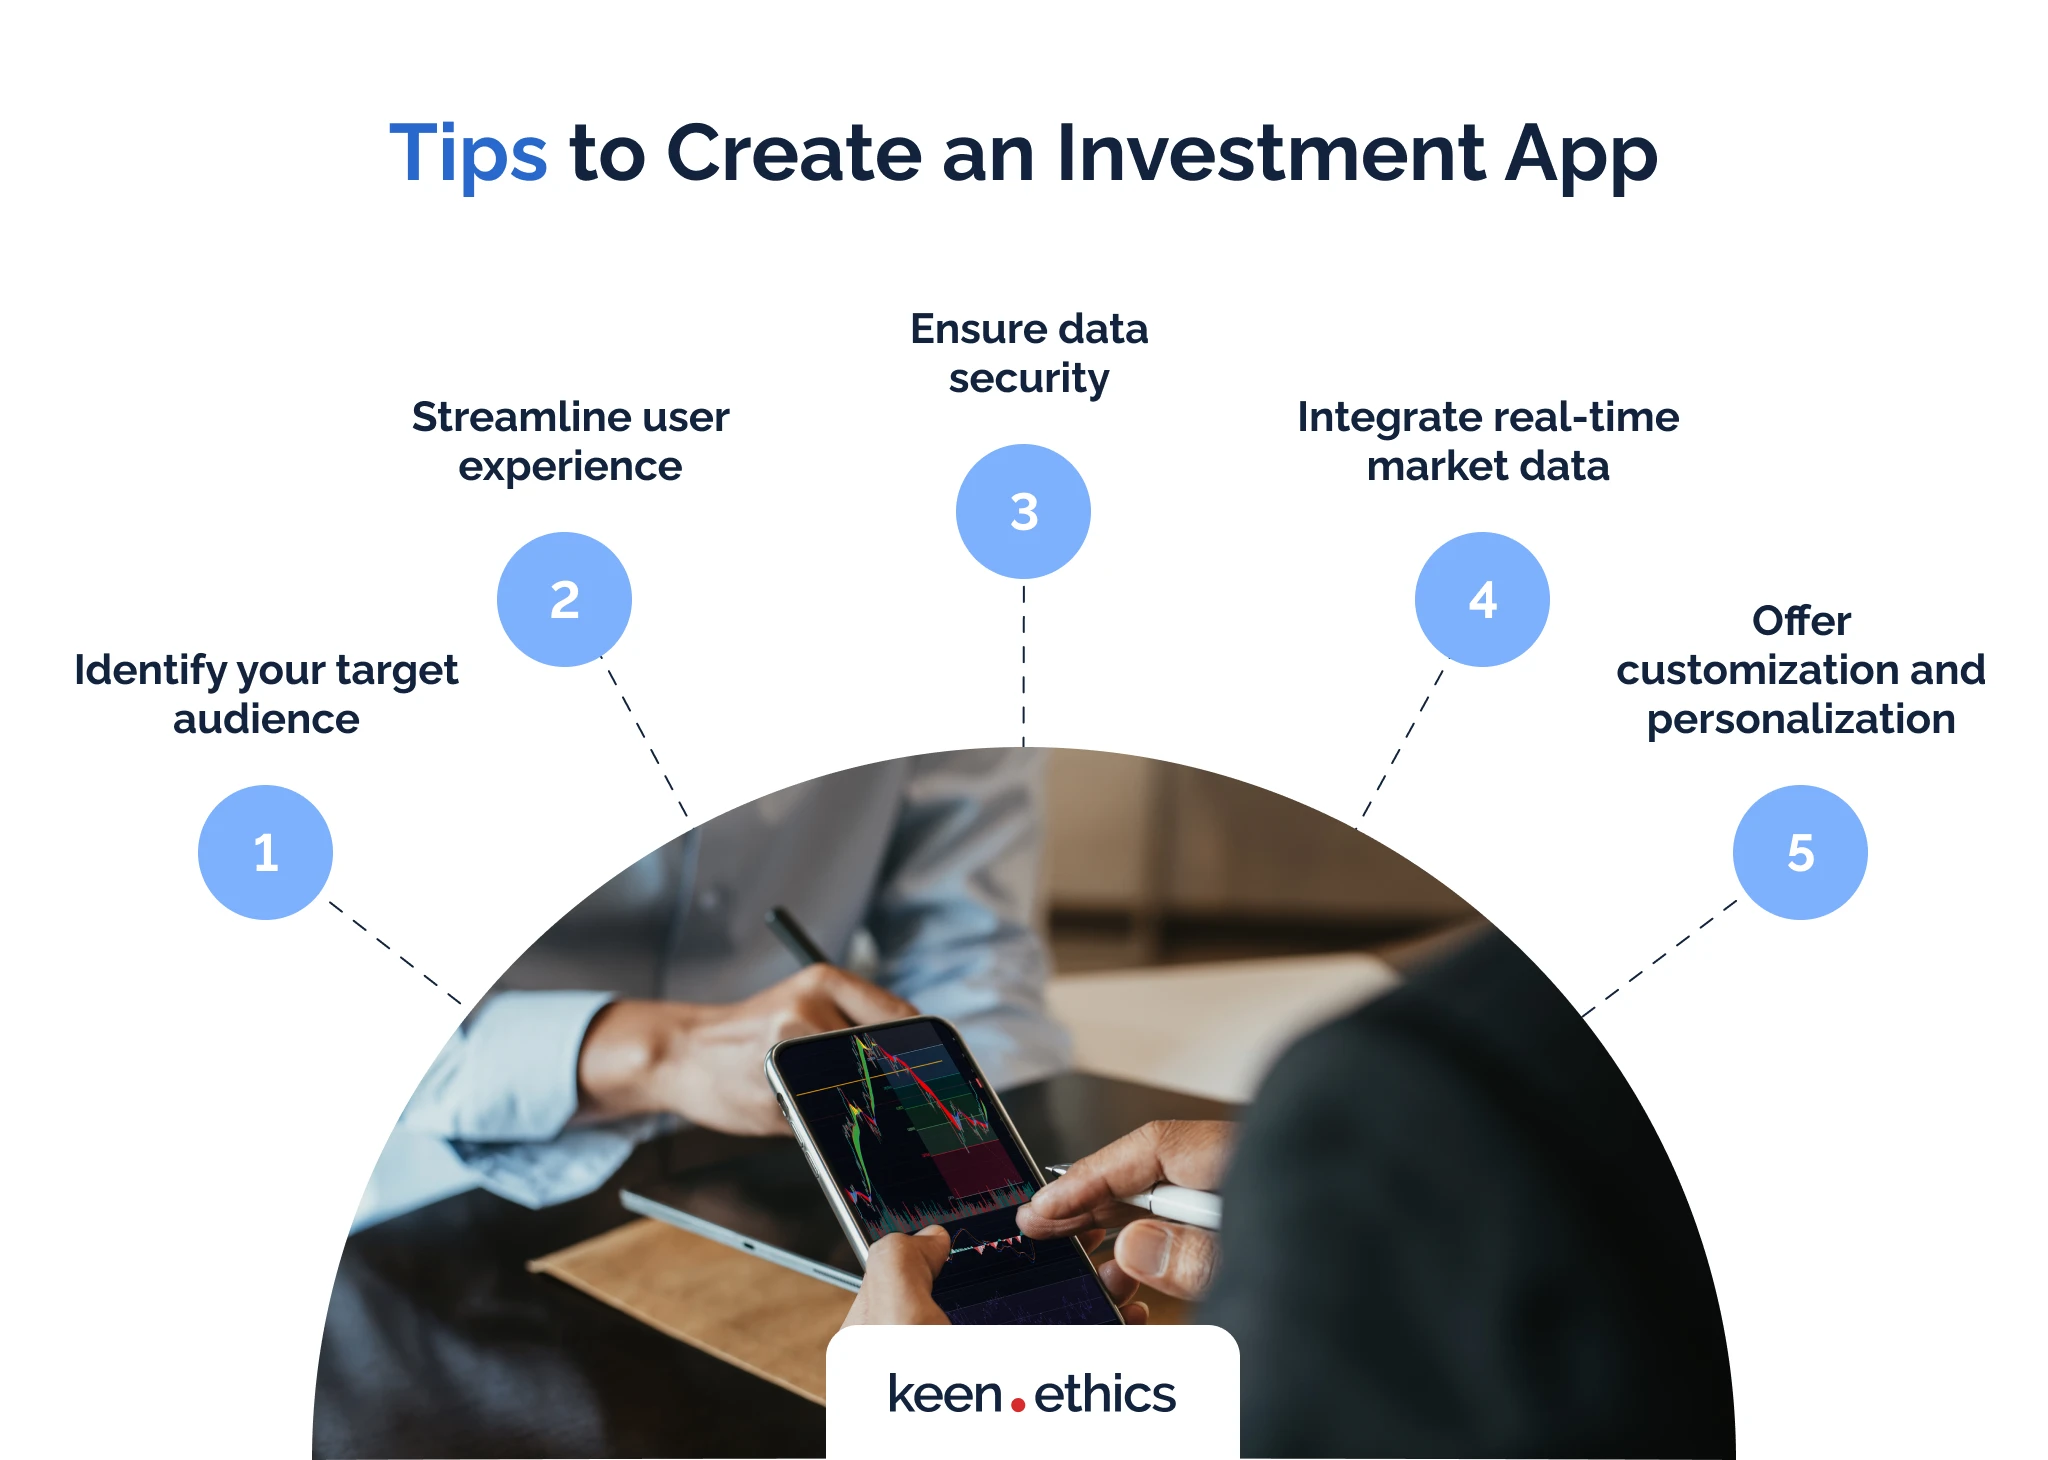 Tips to create an investment app